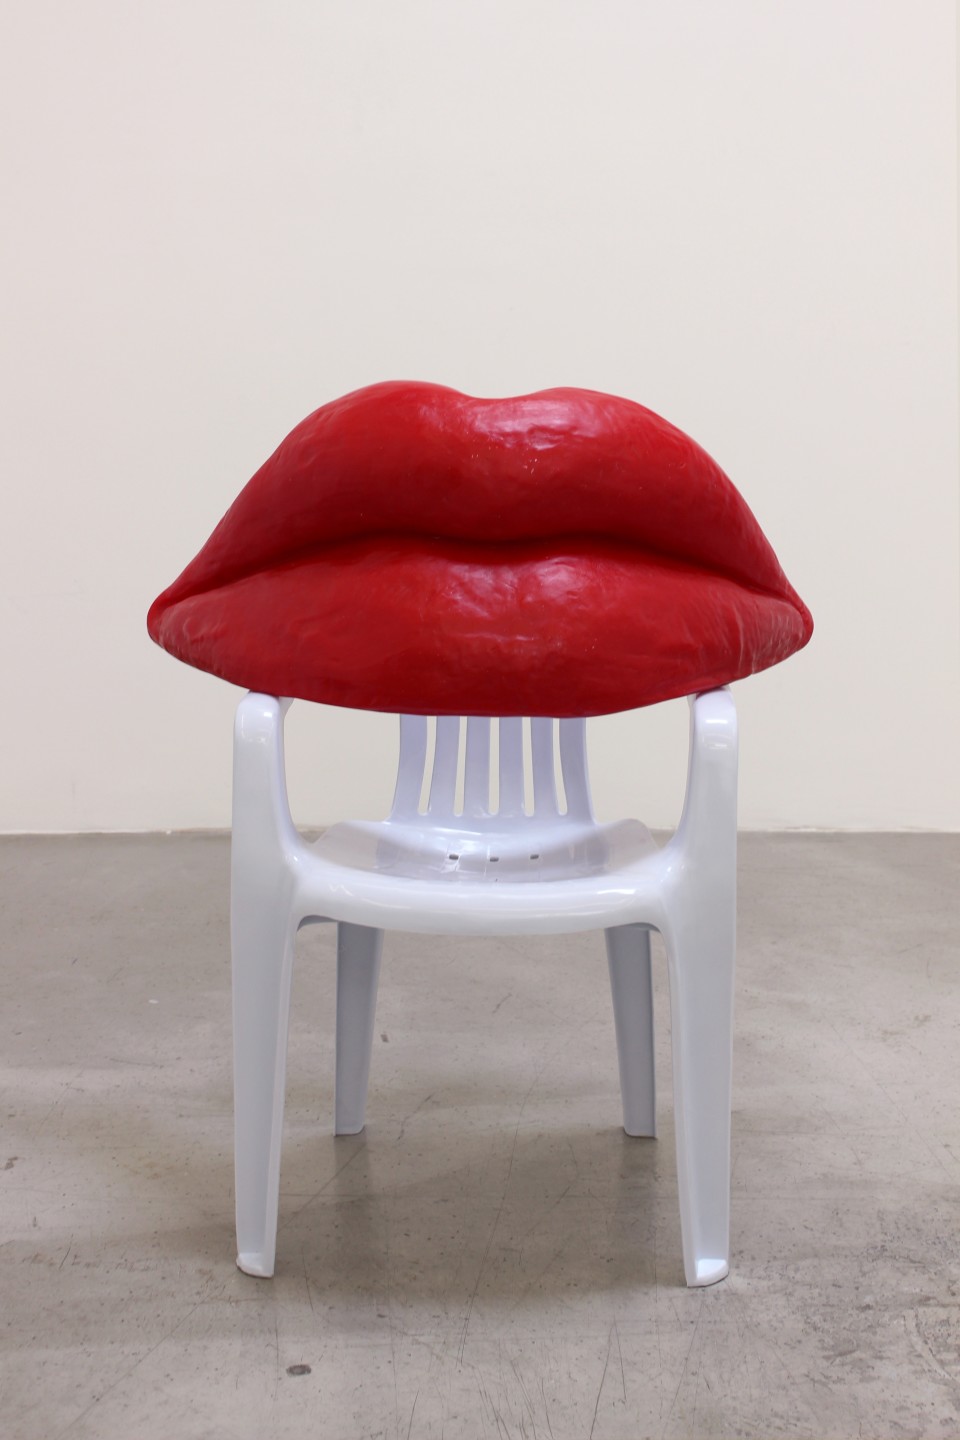 Image: Nevine Mahmoud  Wax Lips seated, 2021  polyester resin, plastic, plastic chair, and steel hardware  38 x 32 x 20 inches